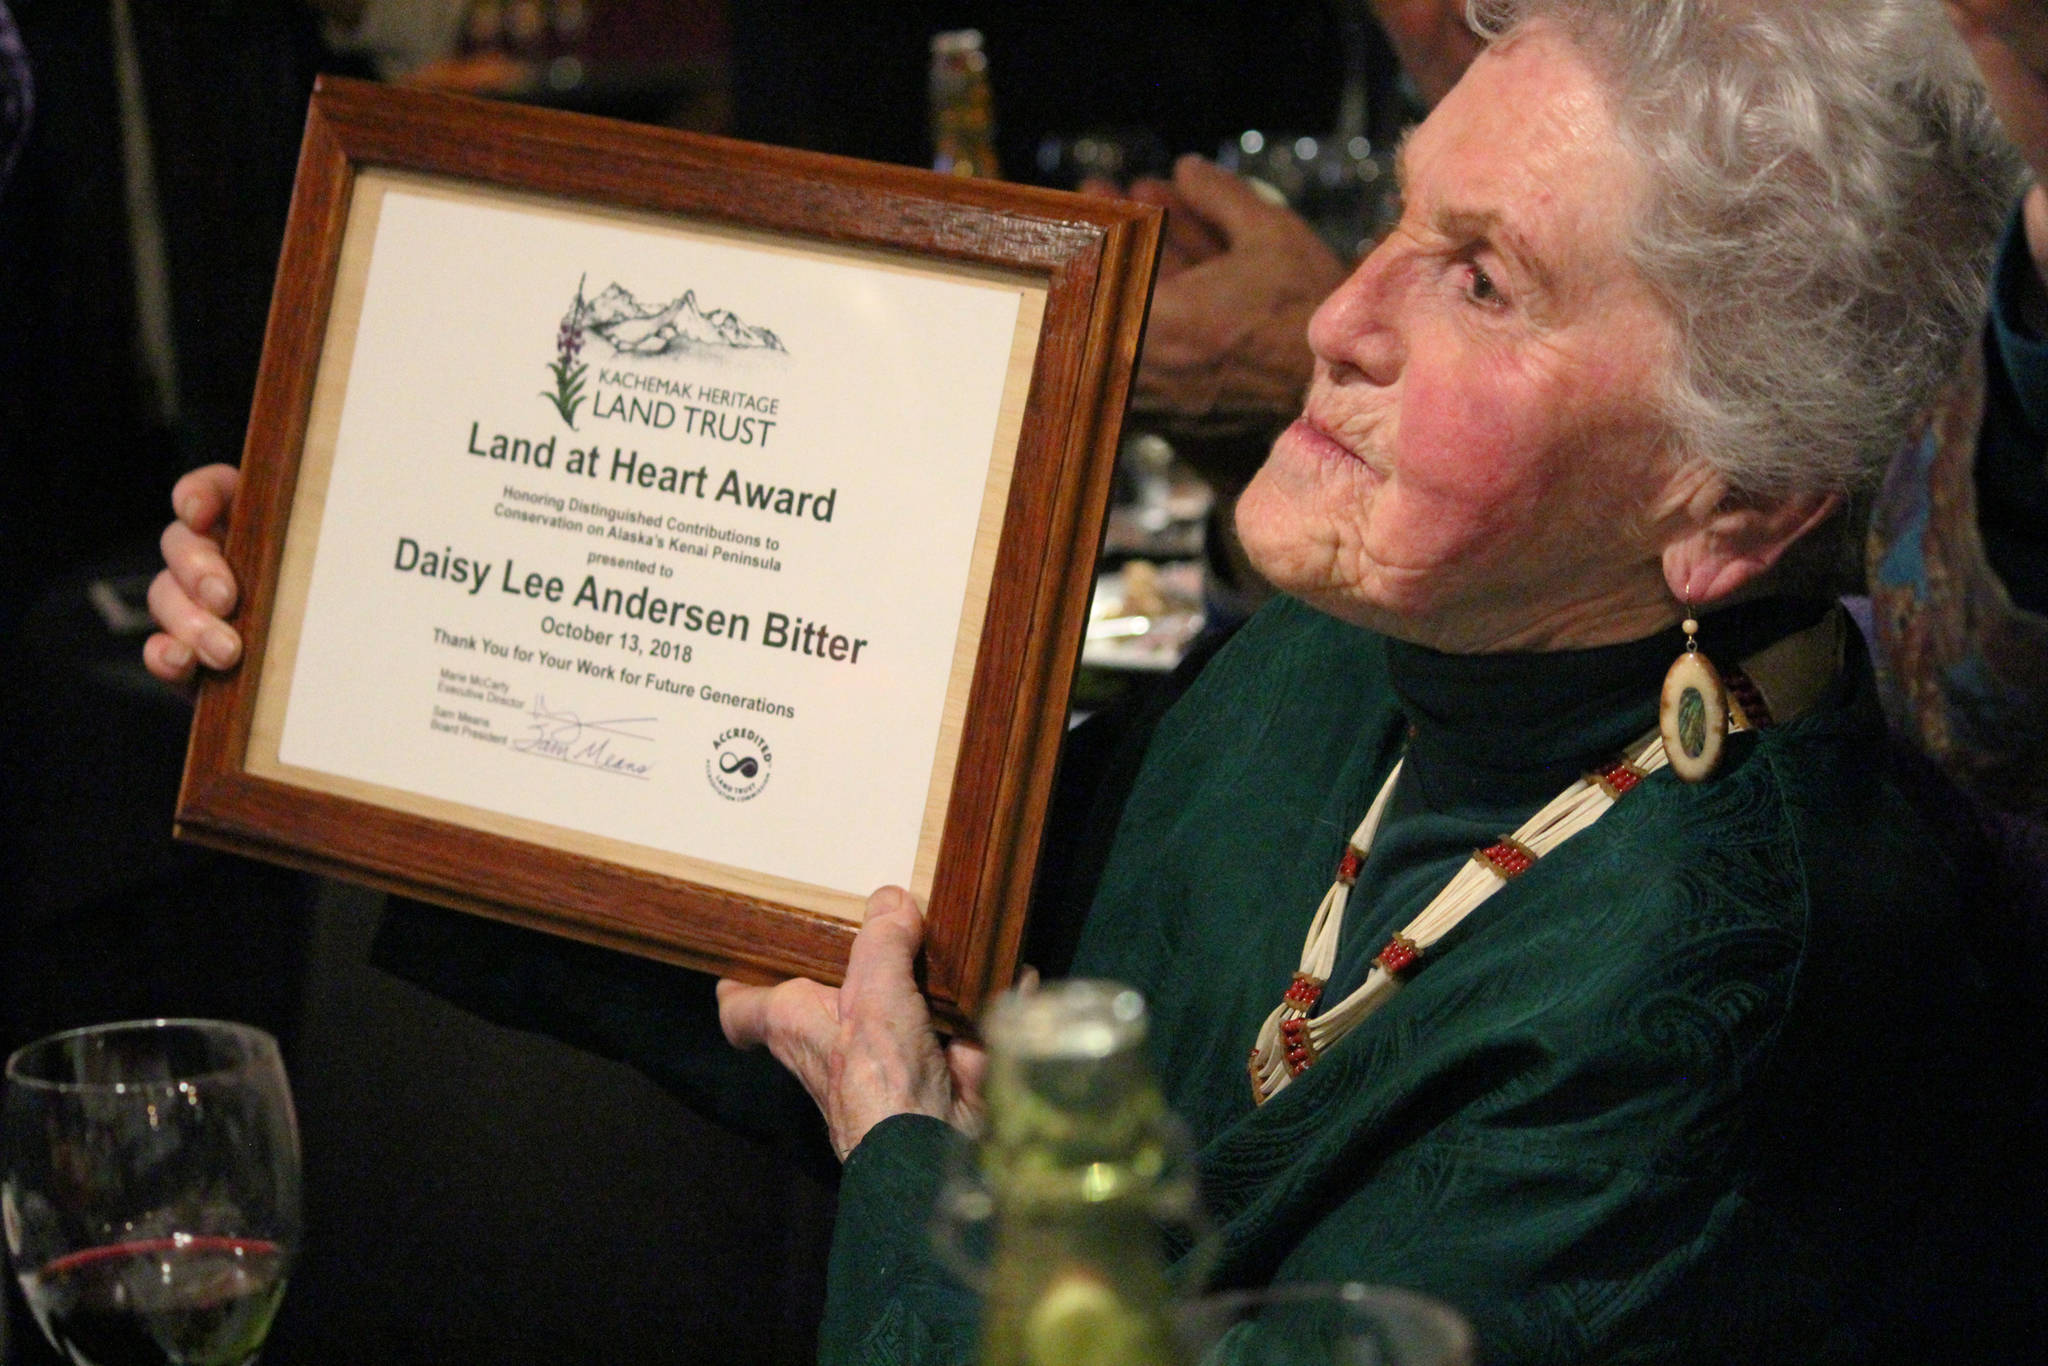 Daisy Lee Anderson Bitter accepts the 2018 Land at Heart Award from the Kachemak Heritage Land Trust on Saturday, Oct. 13, 2018 during the Open Spaces and Wild Places Gala at Wasabi’s Bistro in Homer, Alaska. (Photo by Megan Pacer/Homer News)